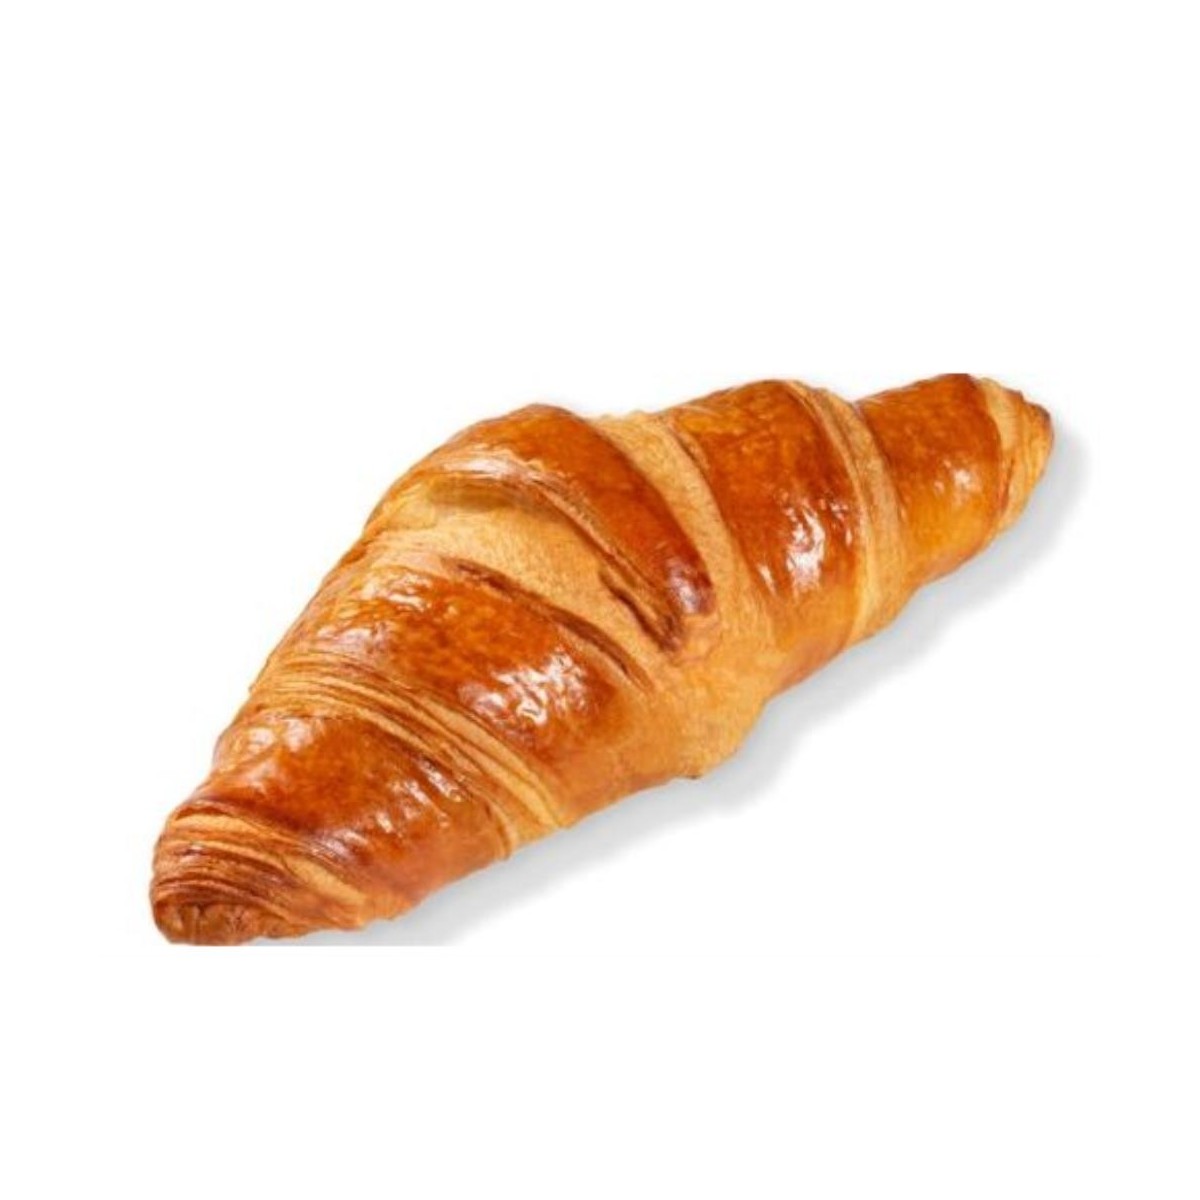 DAUPHINE 2204154 CROISSANT STRAIGHT BUTTER READY TO BAKE 60X70GR  BOX